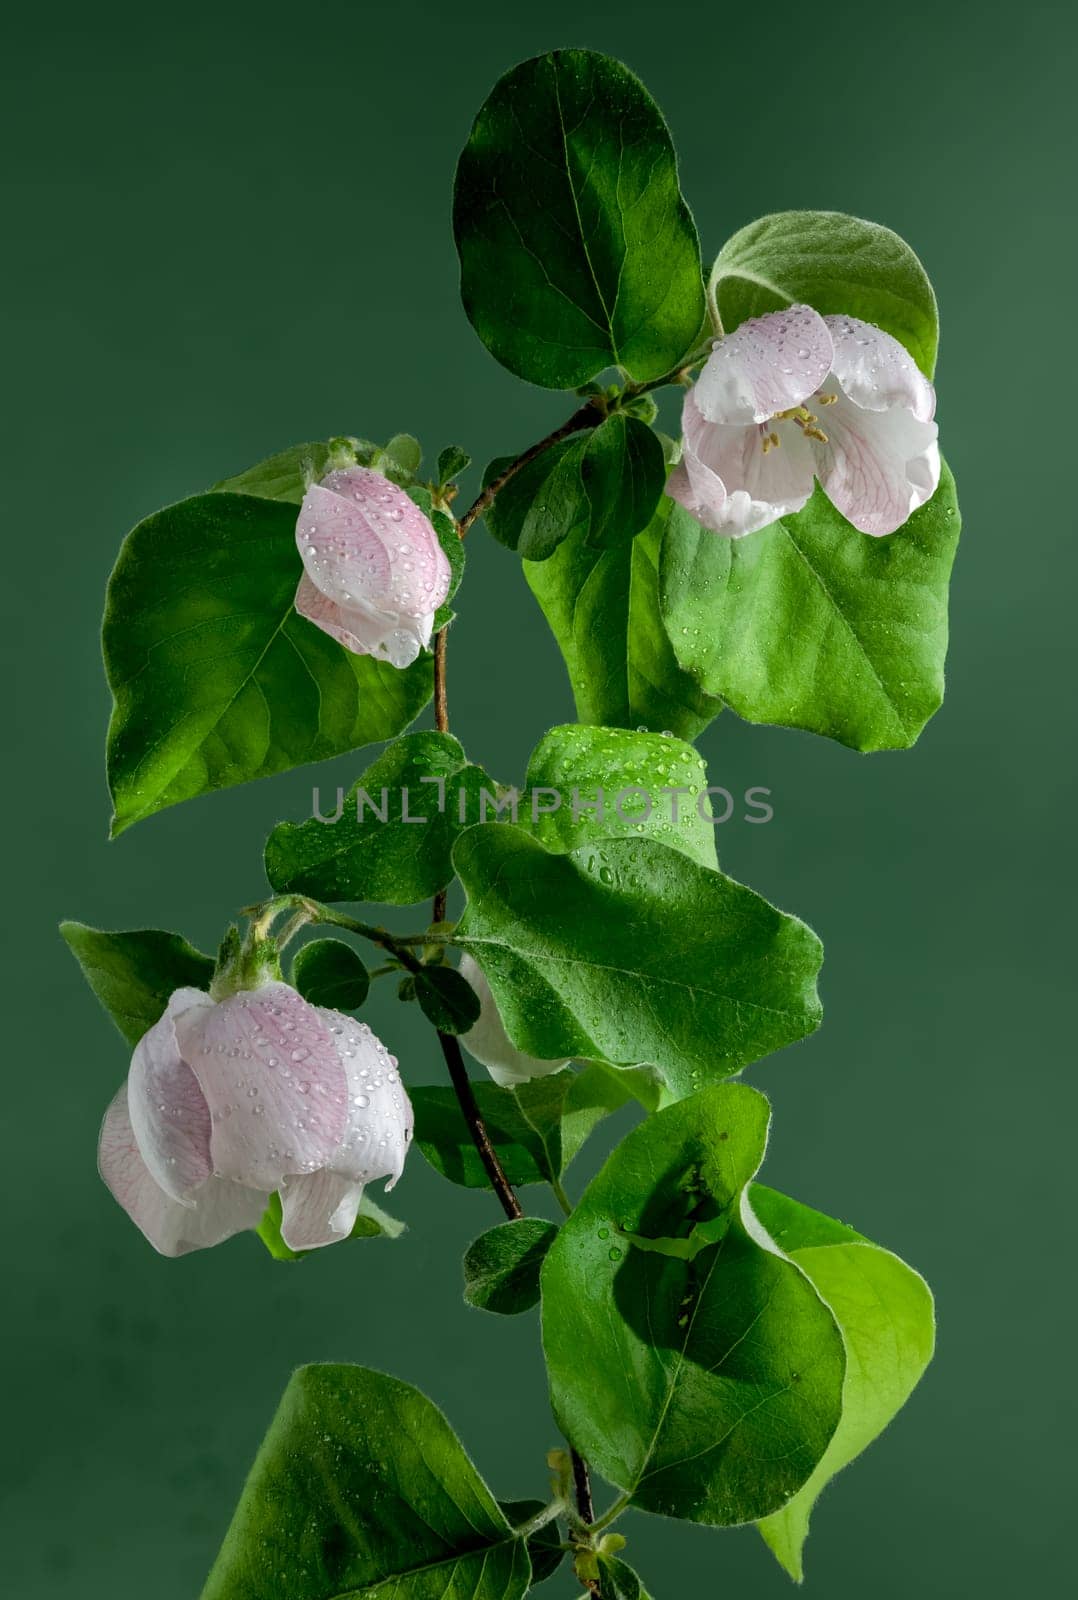 Beautiful white Quince tree flower blossom on a green background. Flower head close-up.